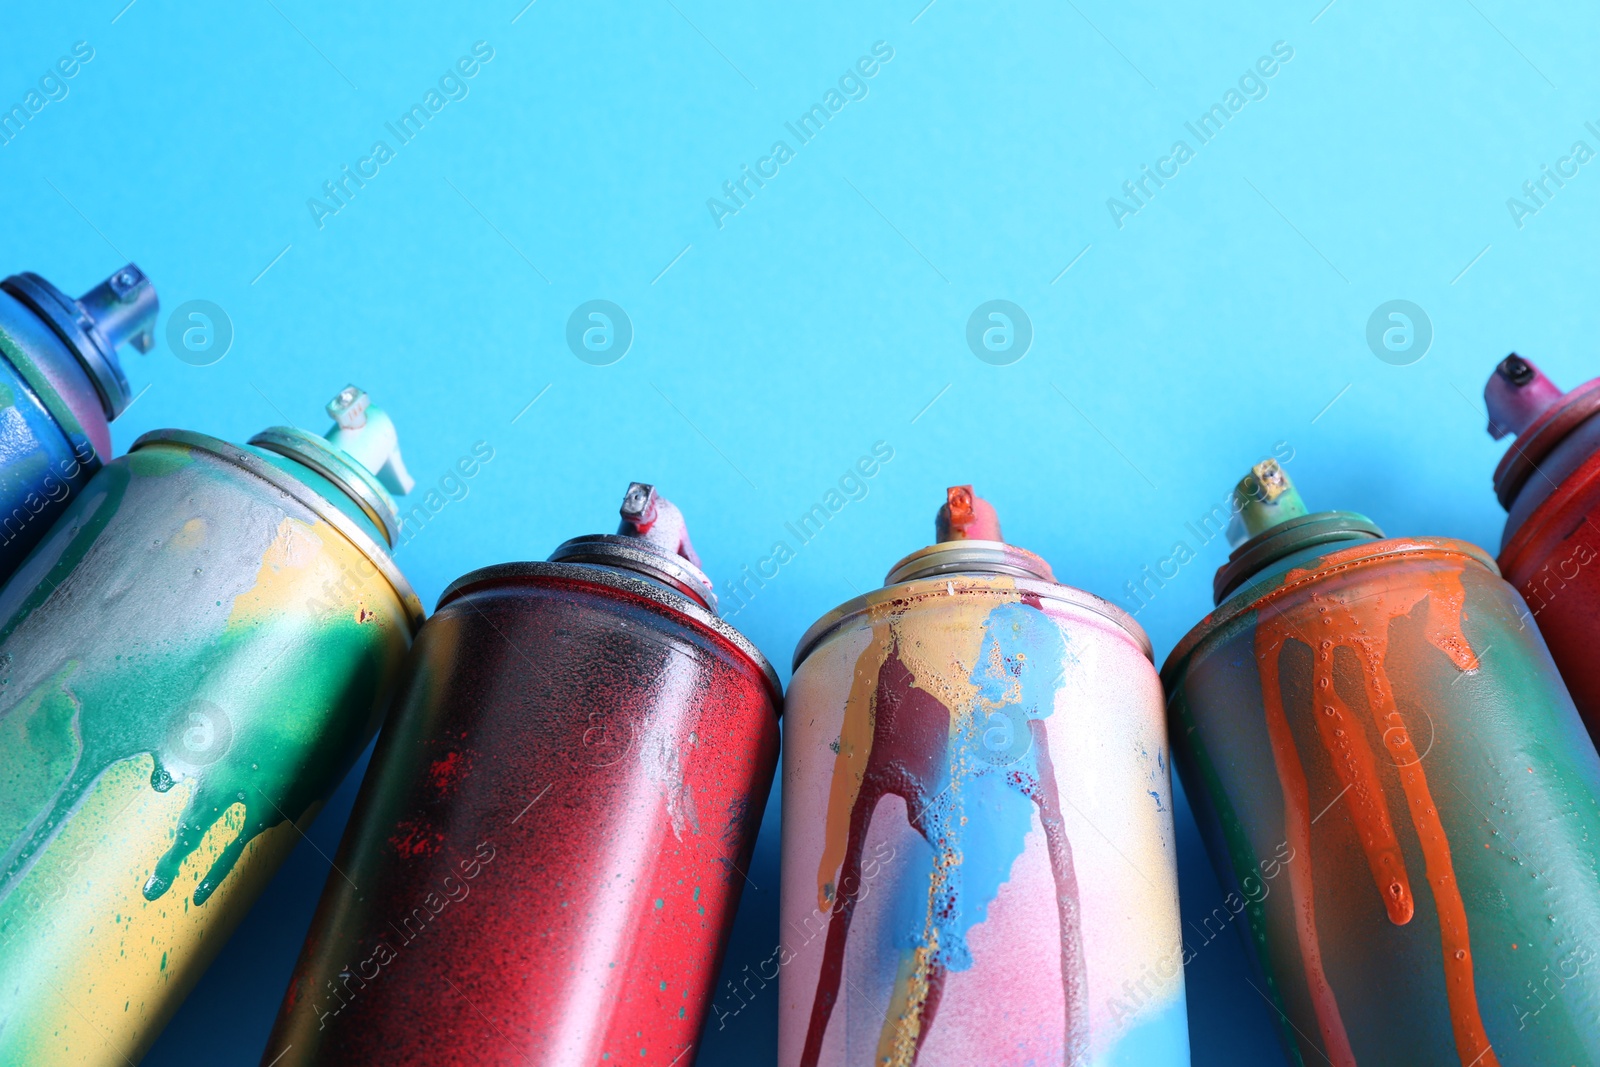 Photo of Many spray paint cans on light blue background